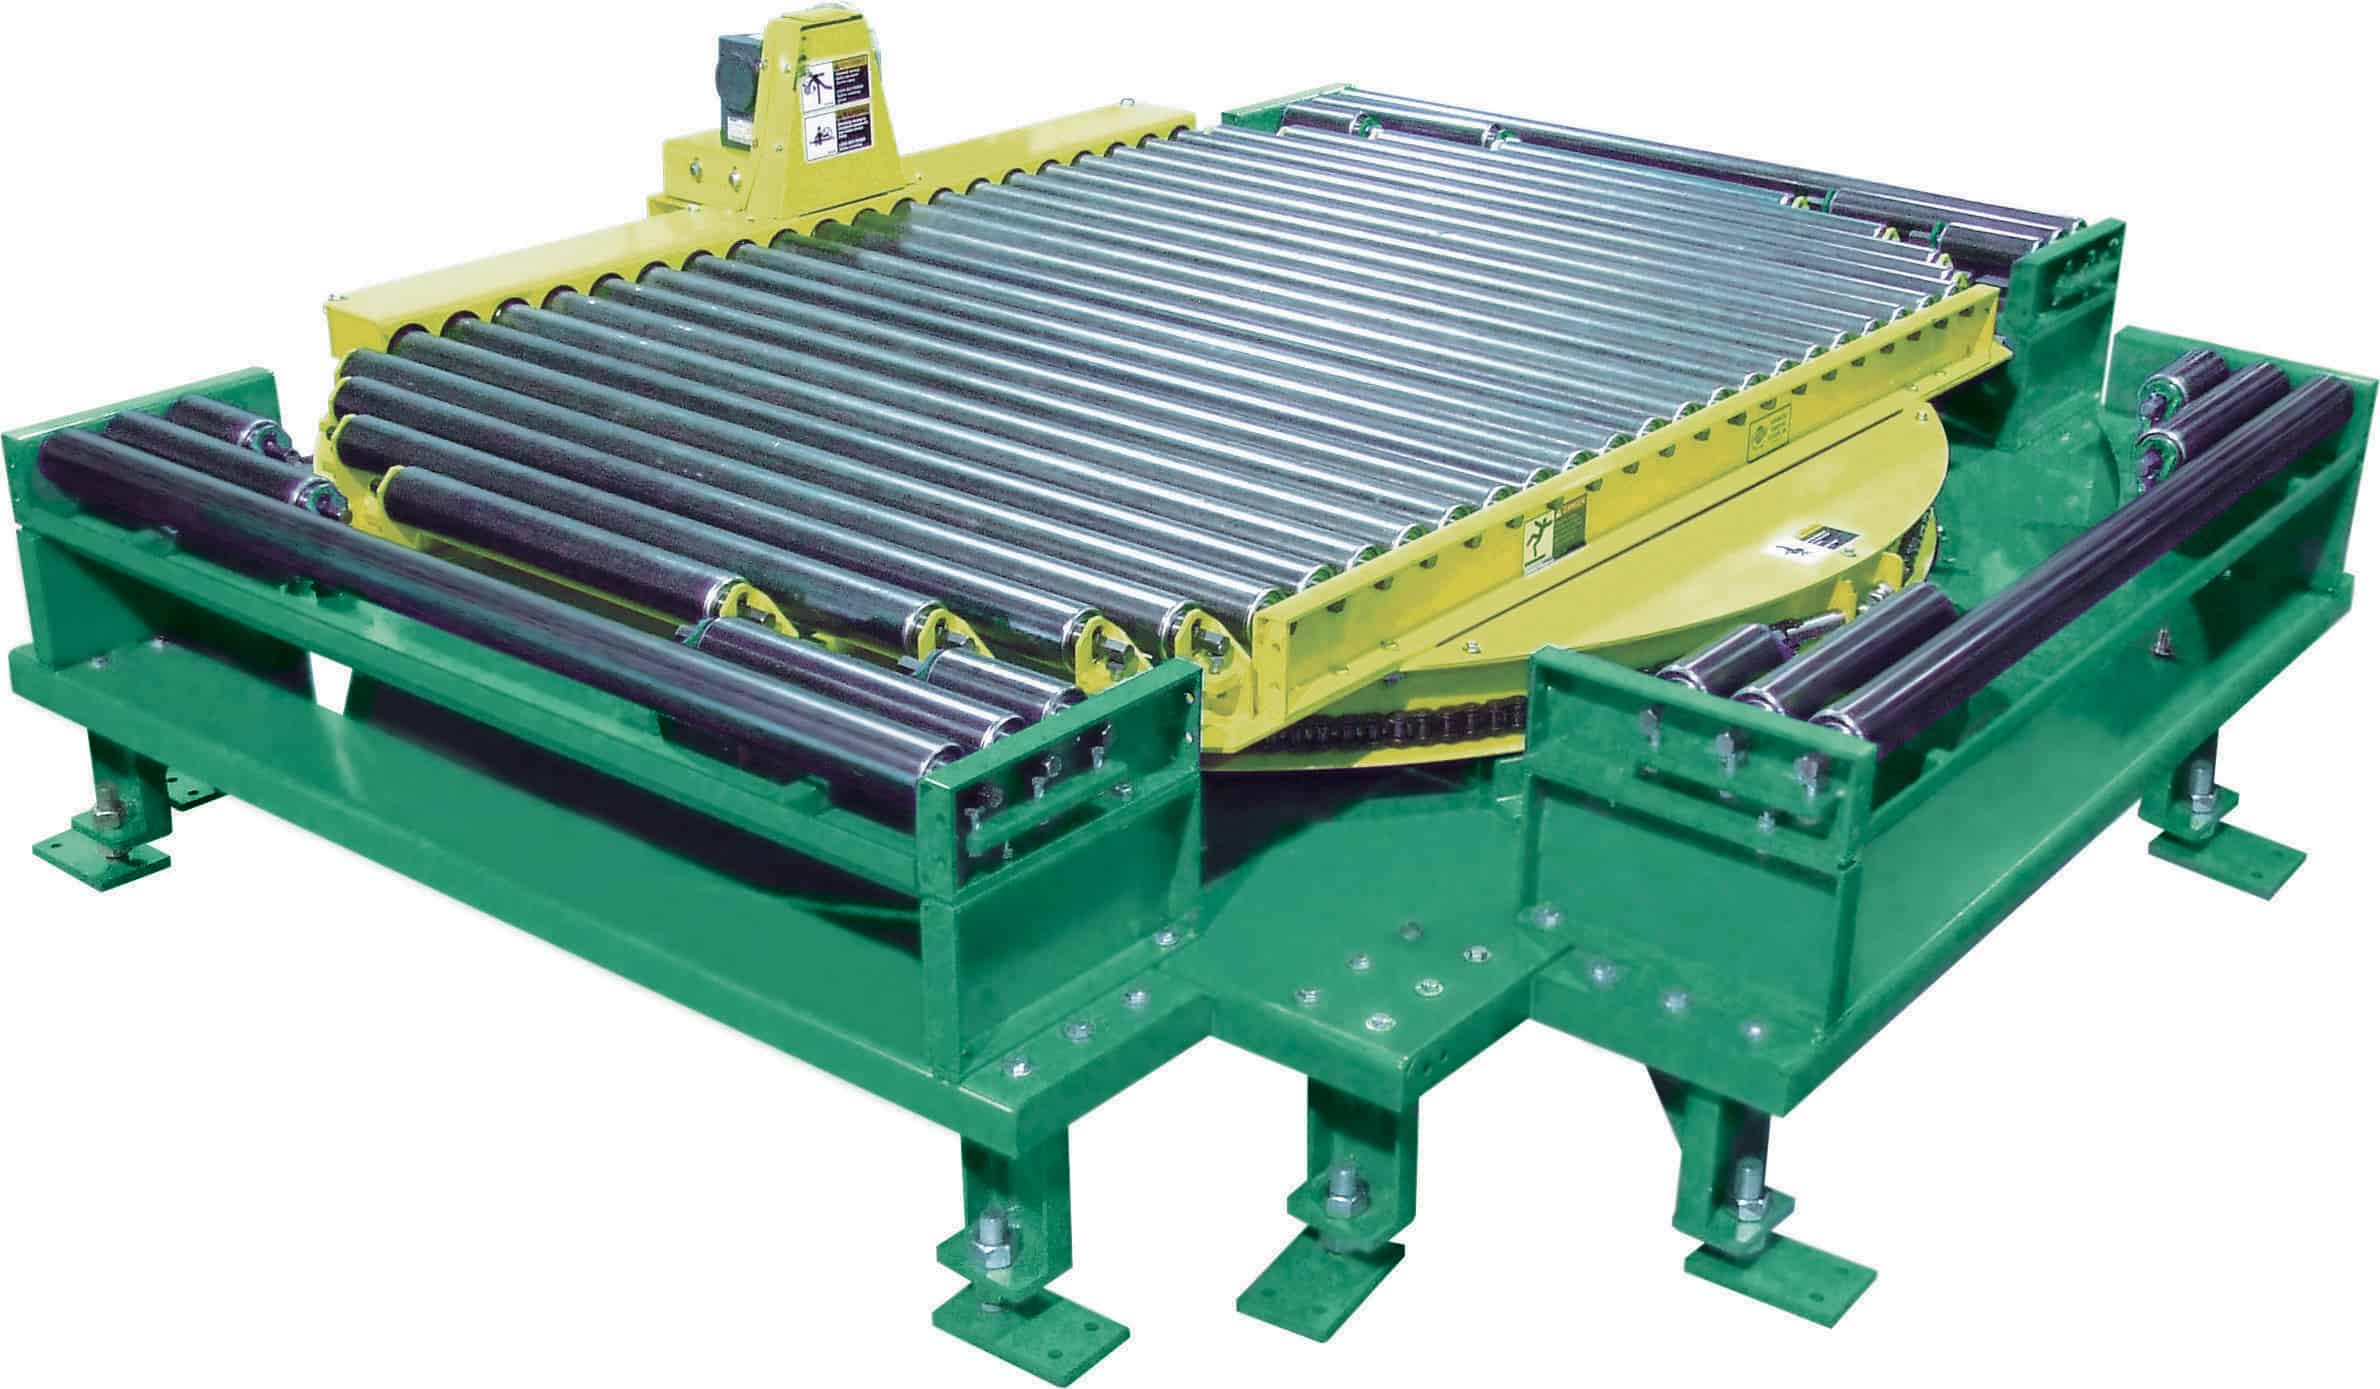 MODEL “251CRR-Powered Turntable” | Automated Conveyor Systems, Inc ...